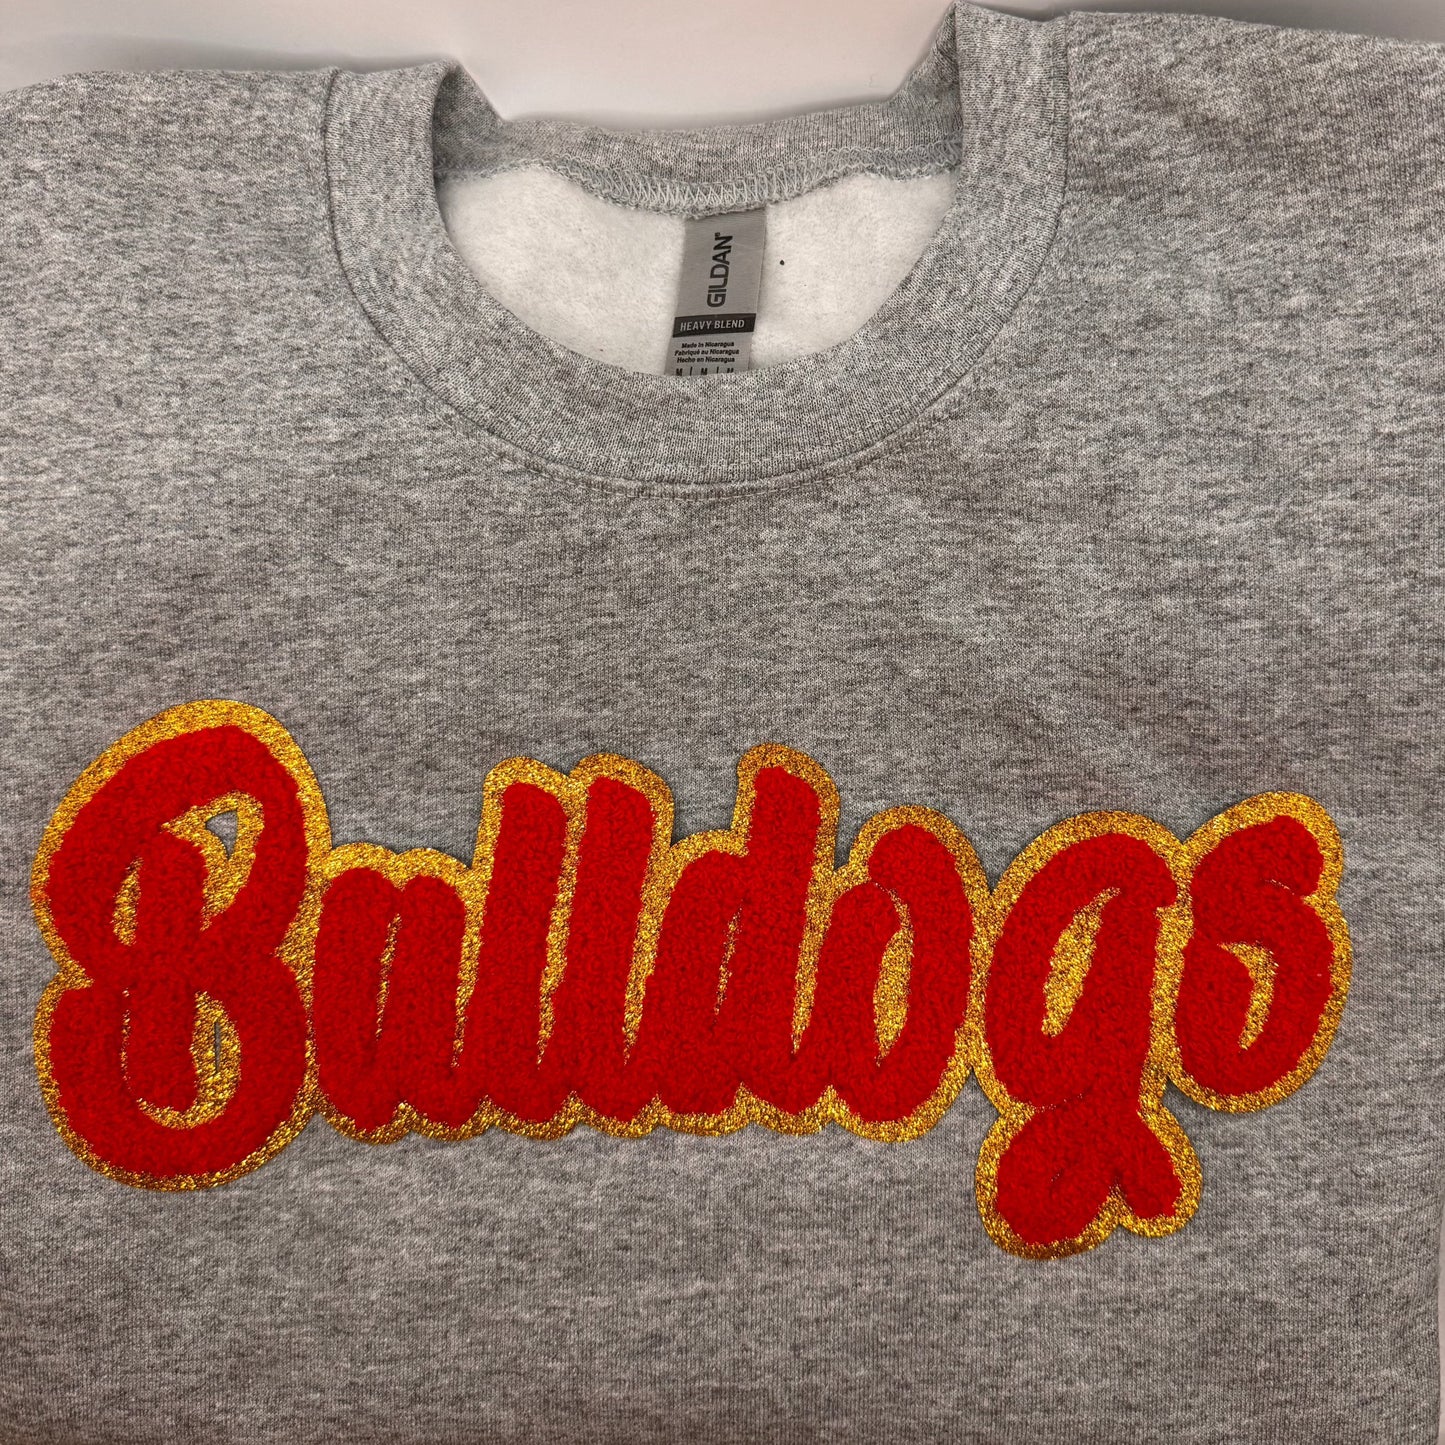 Bulldogs Chenille Patch in a Women's Unisex Crewneck  (see pictures for Sweatshirt Style)